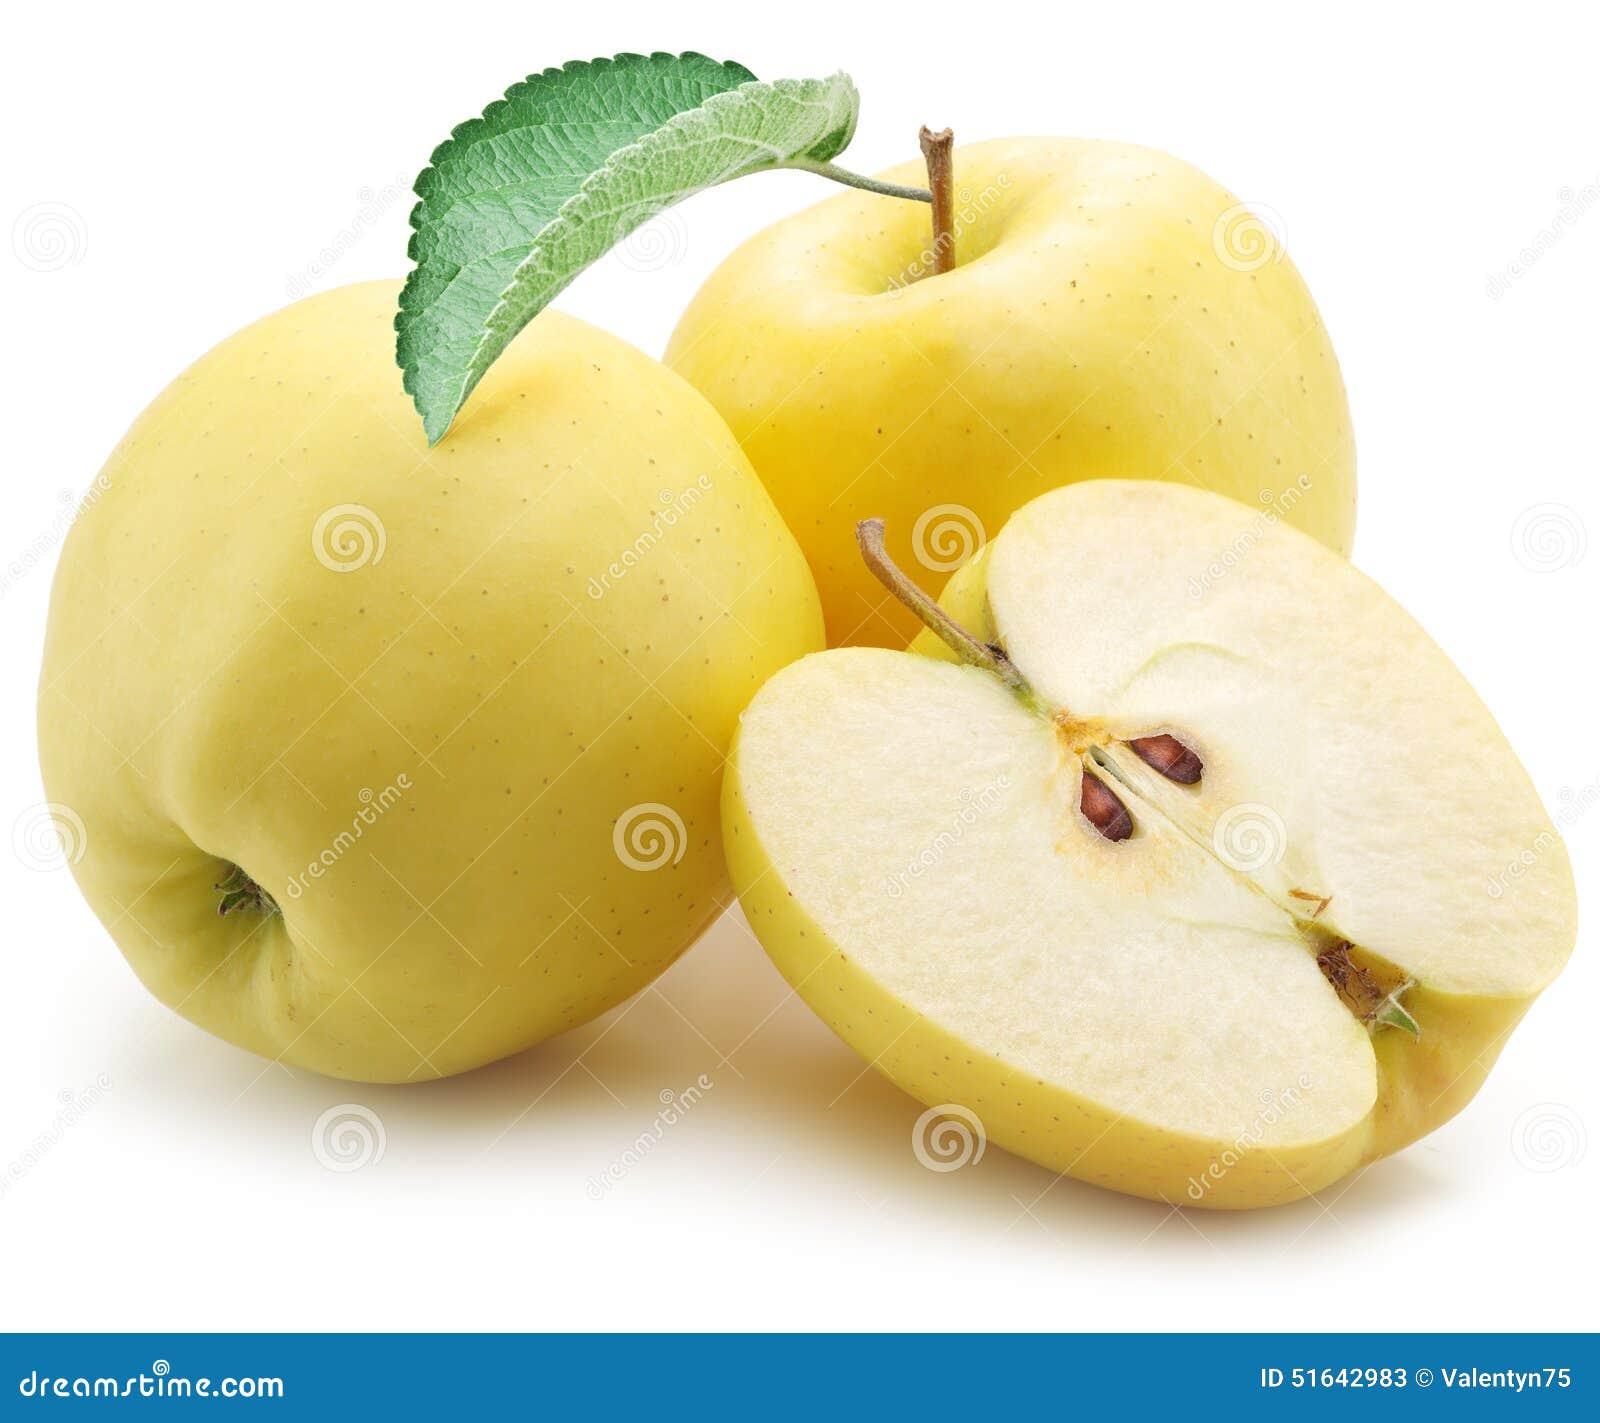 Yellow Apples Isolated On White Background Stock Photo - Download